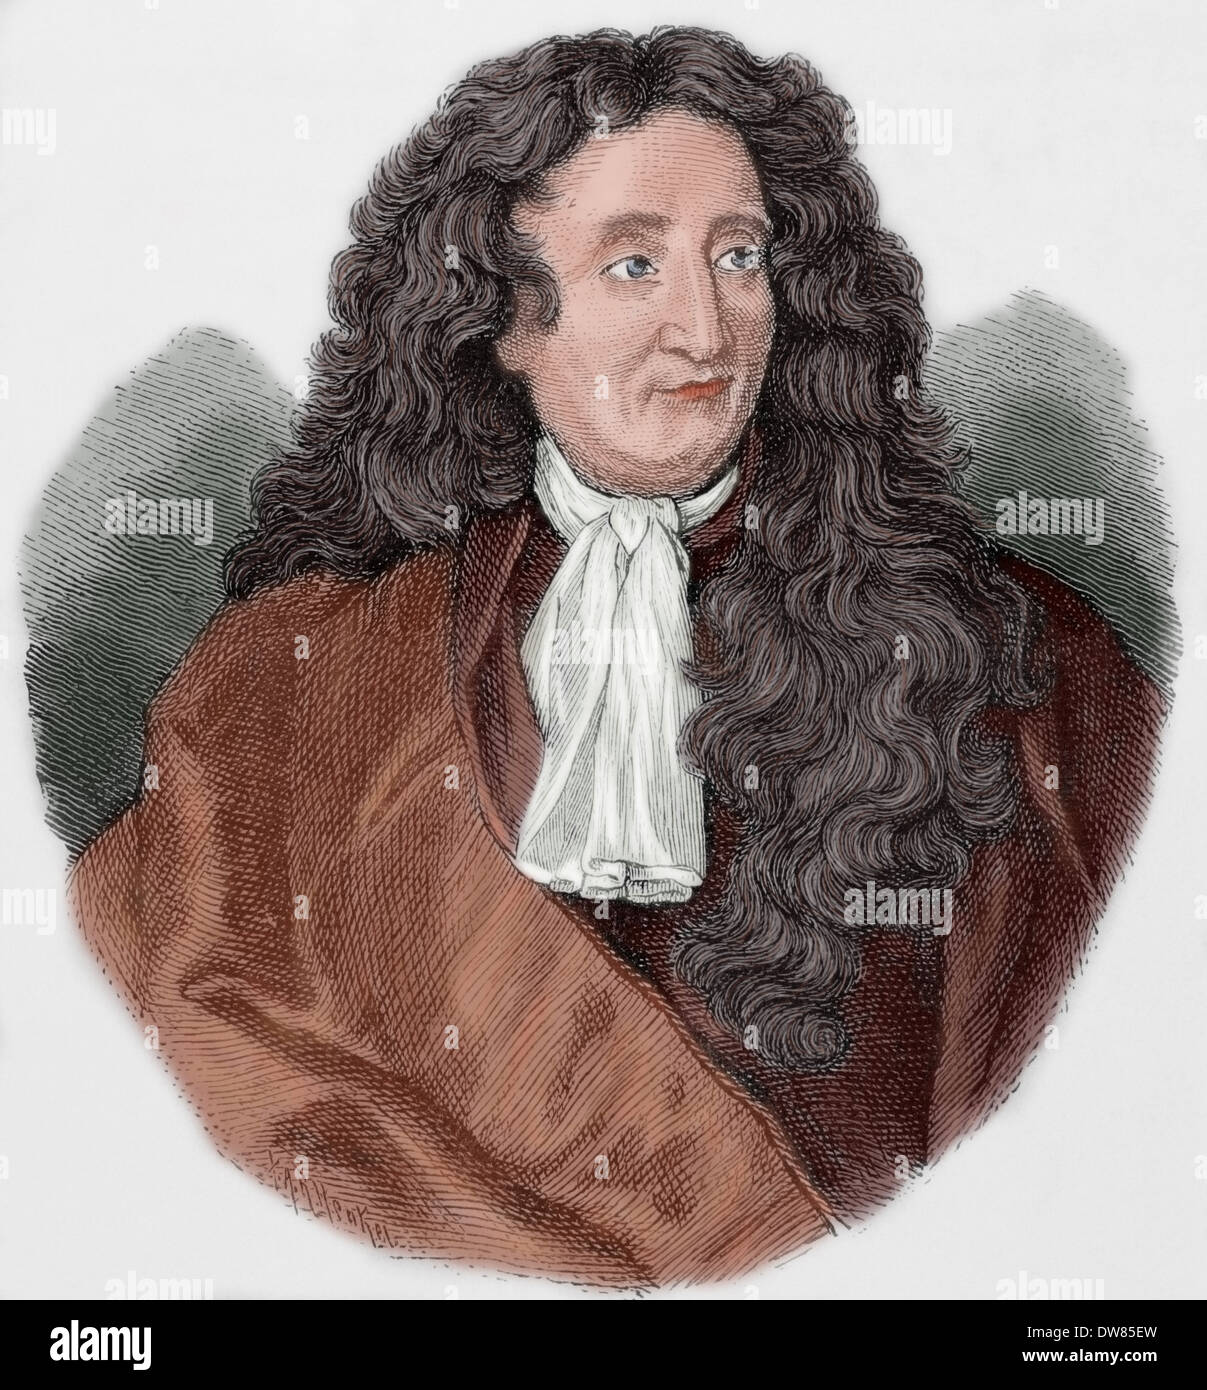 Jean de la Fontaine (1621-1695). French fabulist. Engraving in History of France, 1881. Colored. Stock Photo